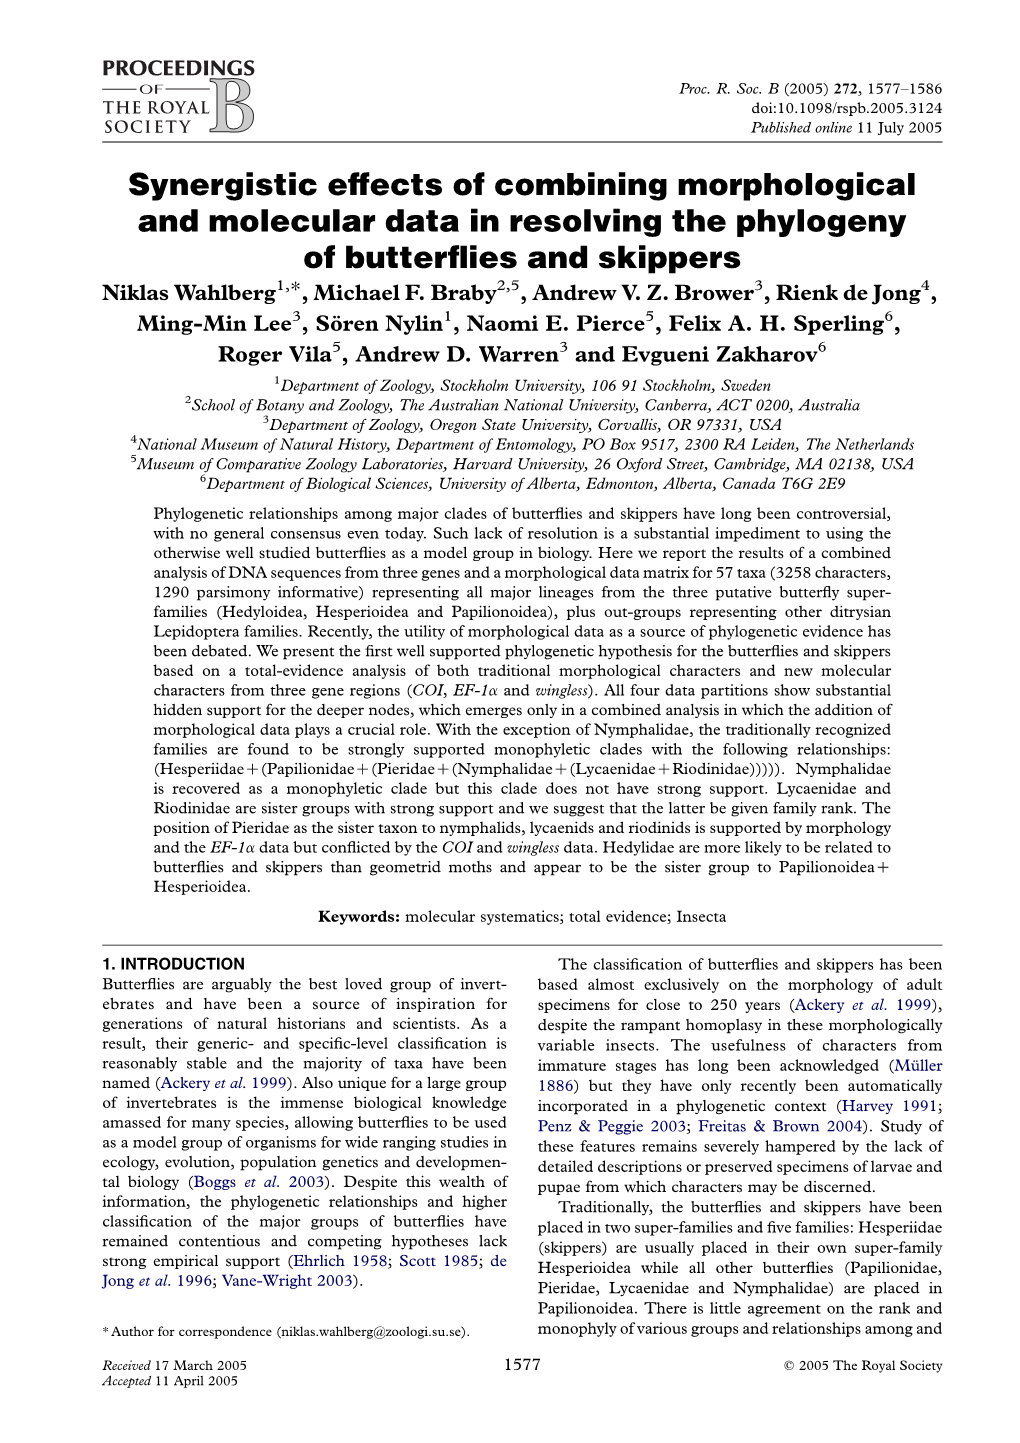 Synergistic Effects of Combining Morphological and Molecular Data in Resolving the Phylogeny of Butterﬂies and Skippers Niklas Wahlberg1,*, Michael F